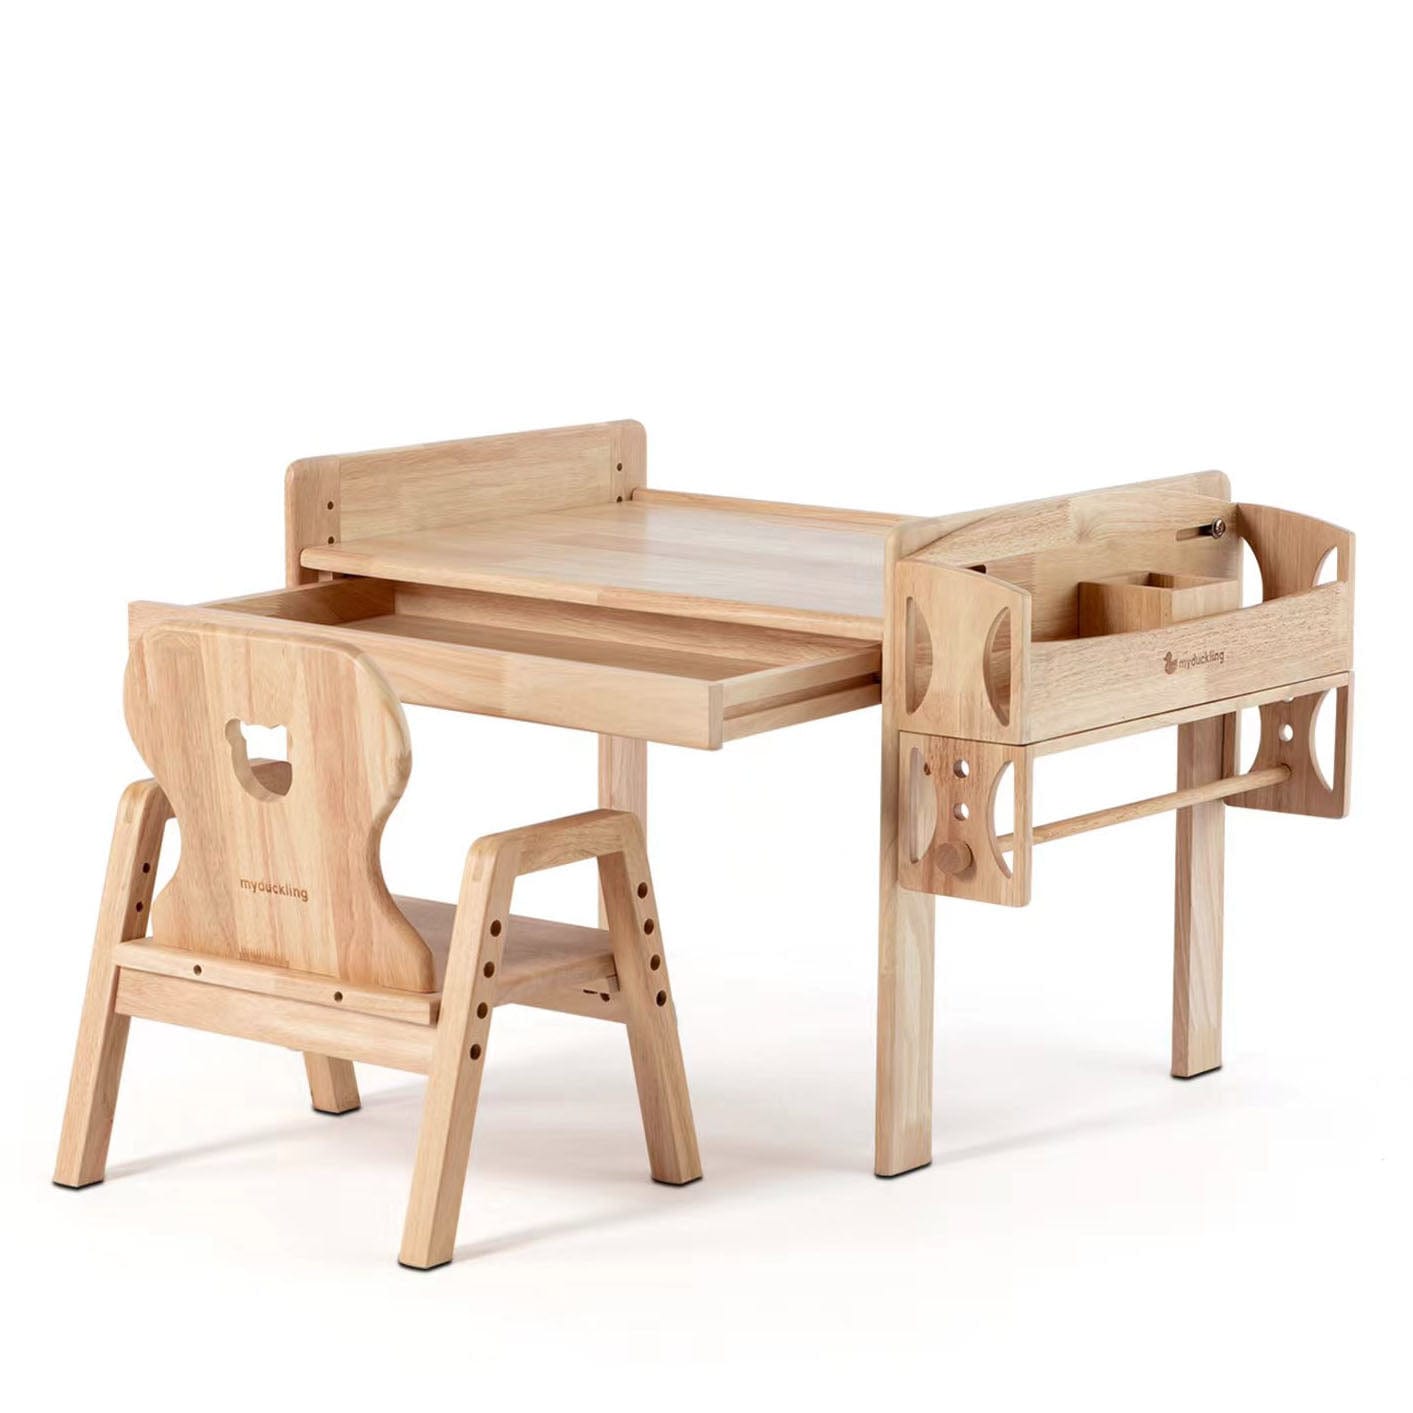 My Duckling KAYA Primary Adjustable Table and Chair Set Bear